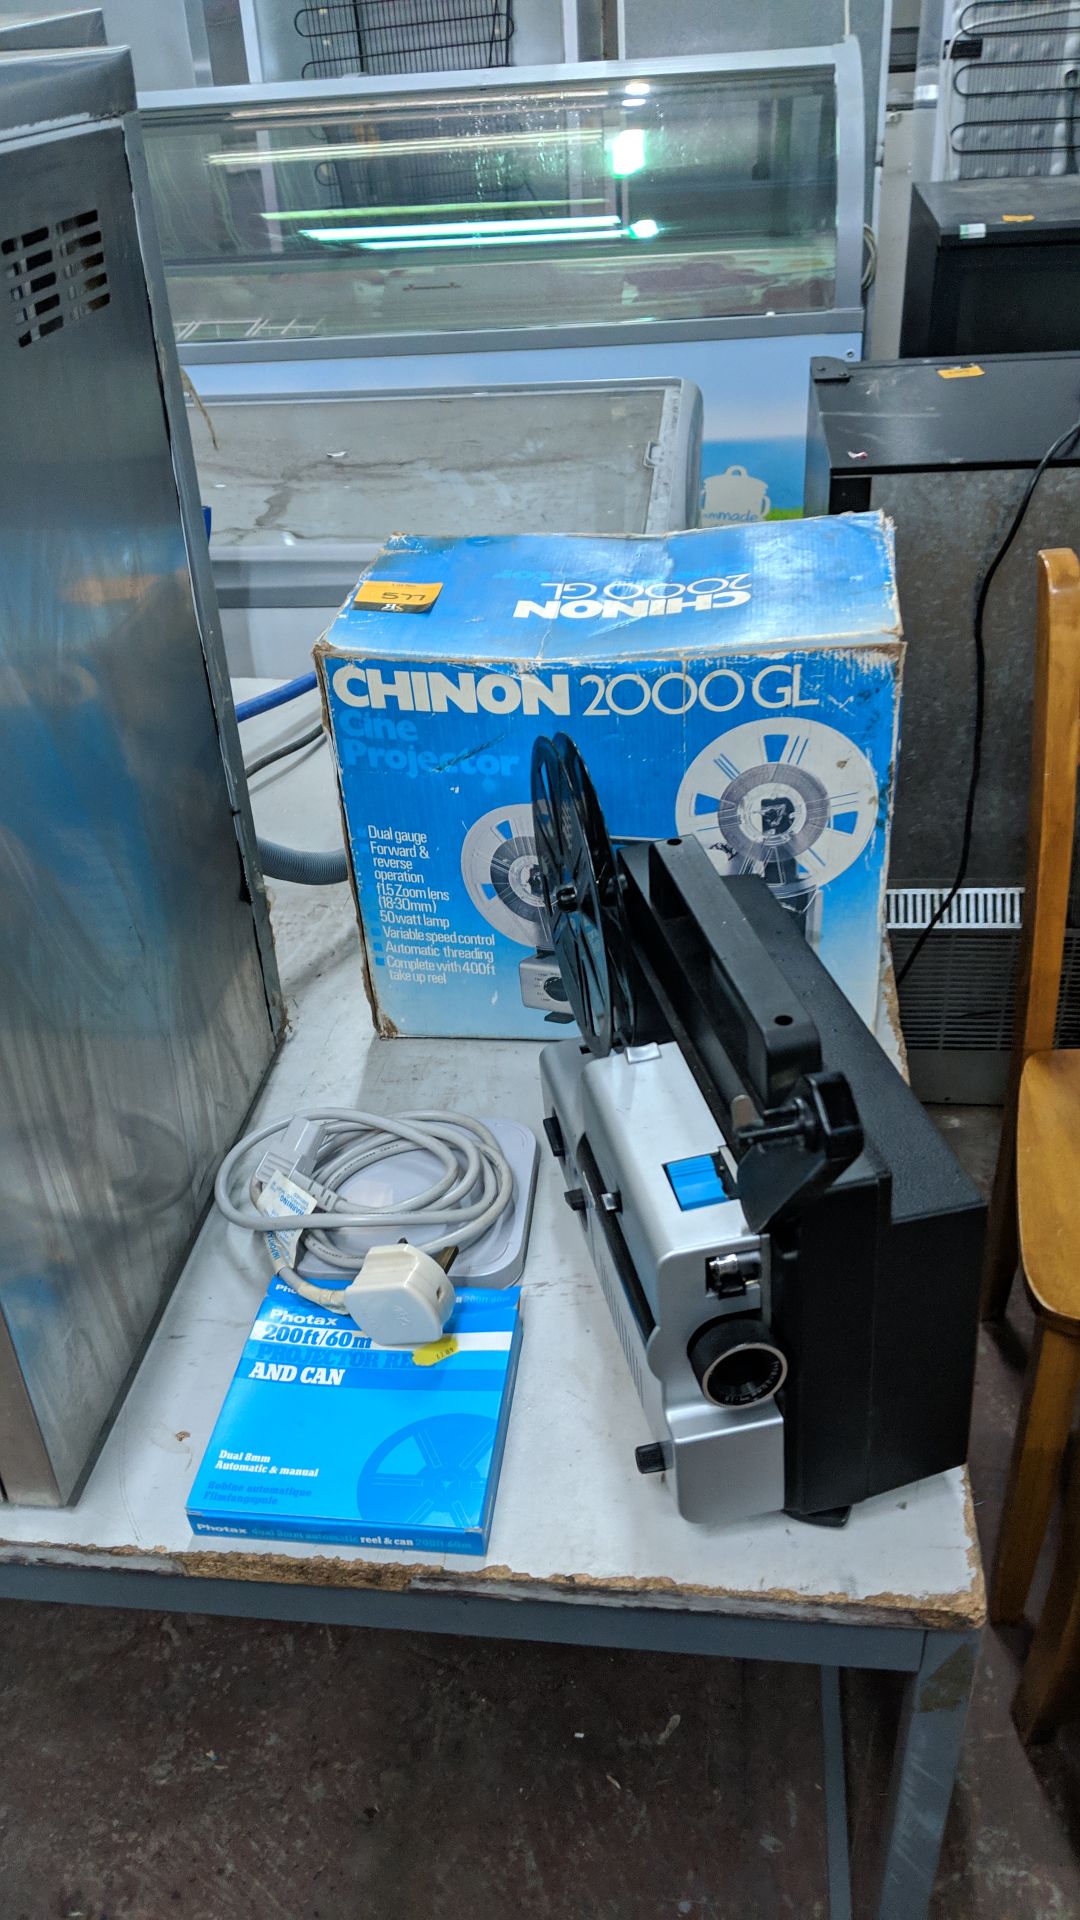 Chinon 2000GL cine projector IMPORTANT: Please remember goods successfully bid upon must be paid for